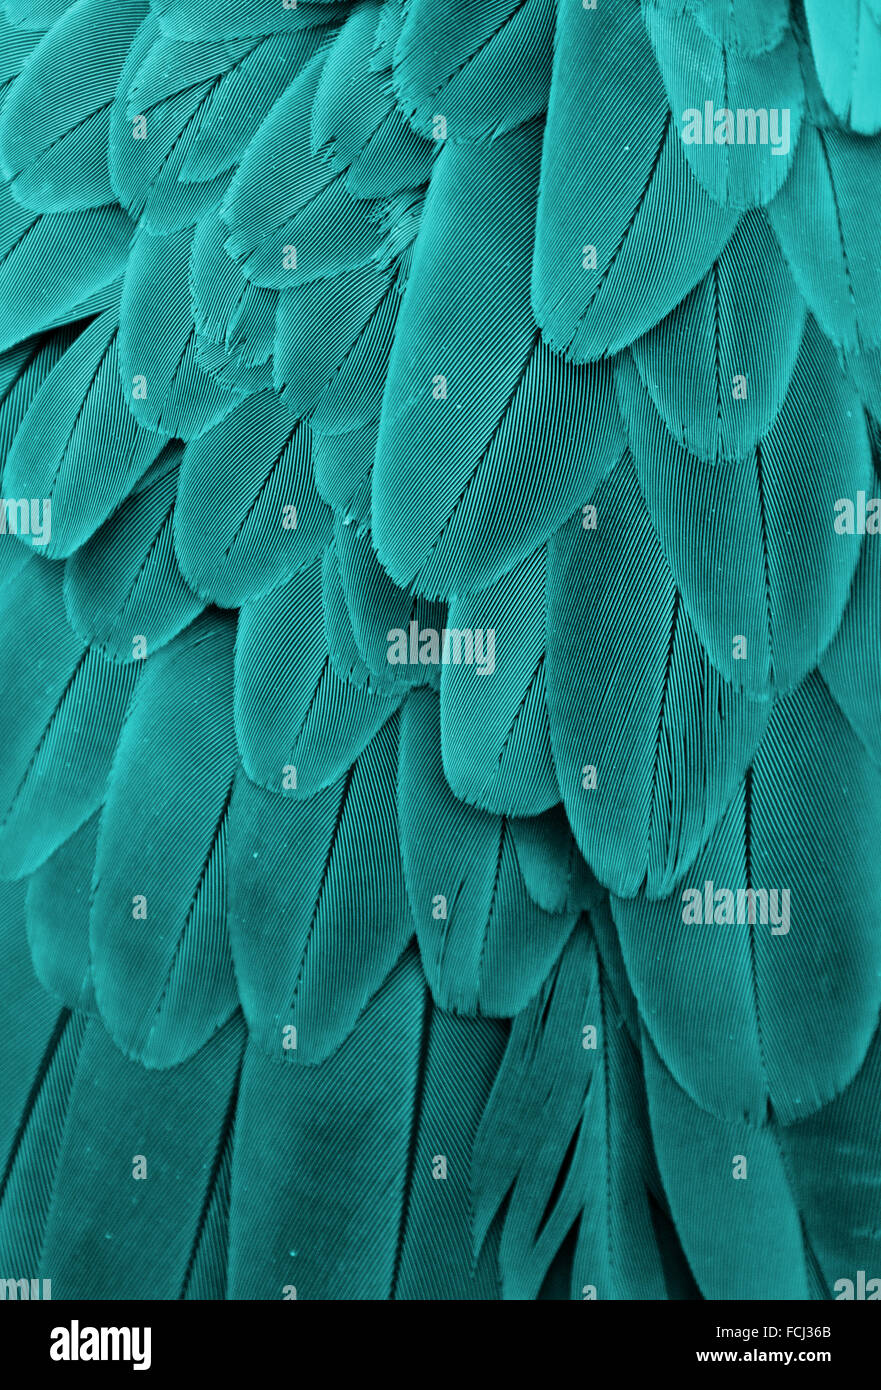 Turquoise / teal / light blue bird feathers from a macaw parrot Stock Photo